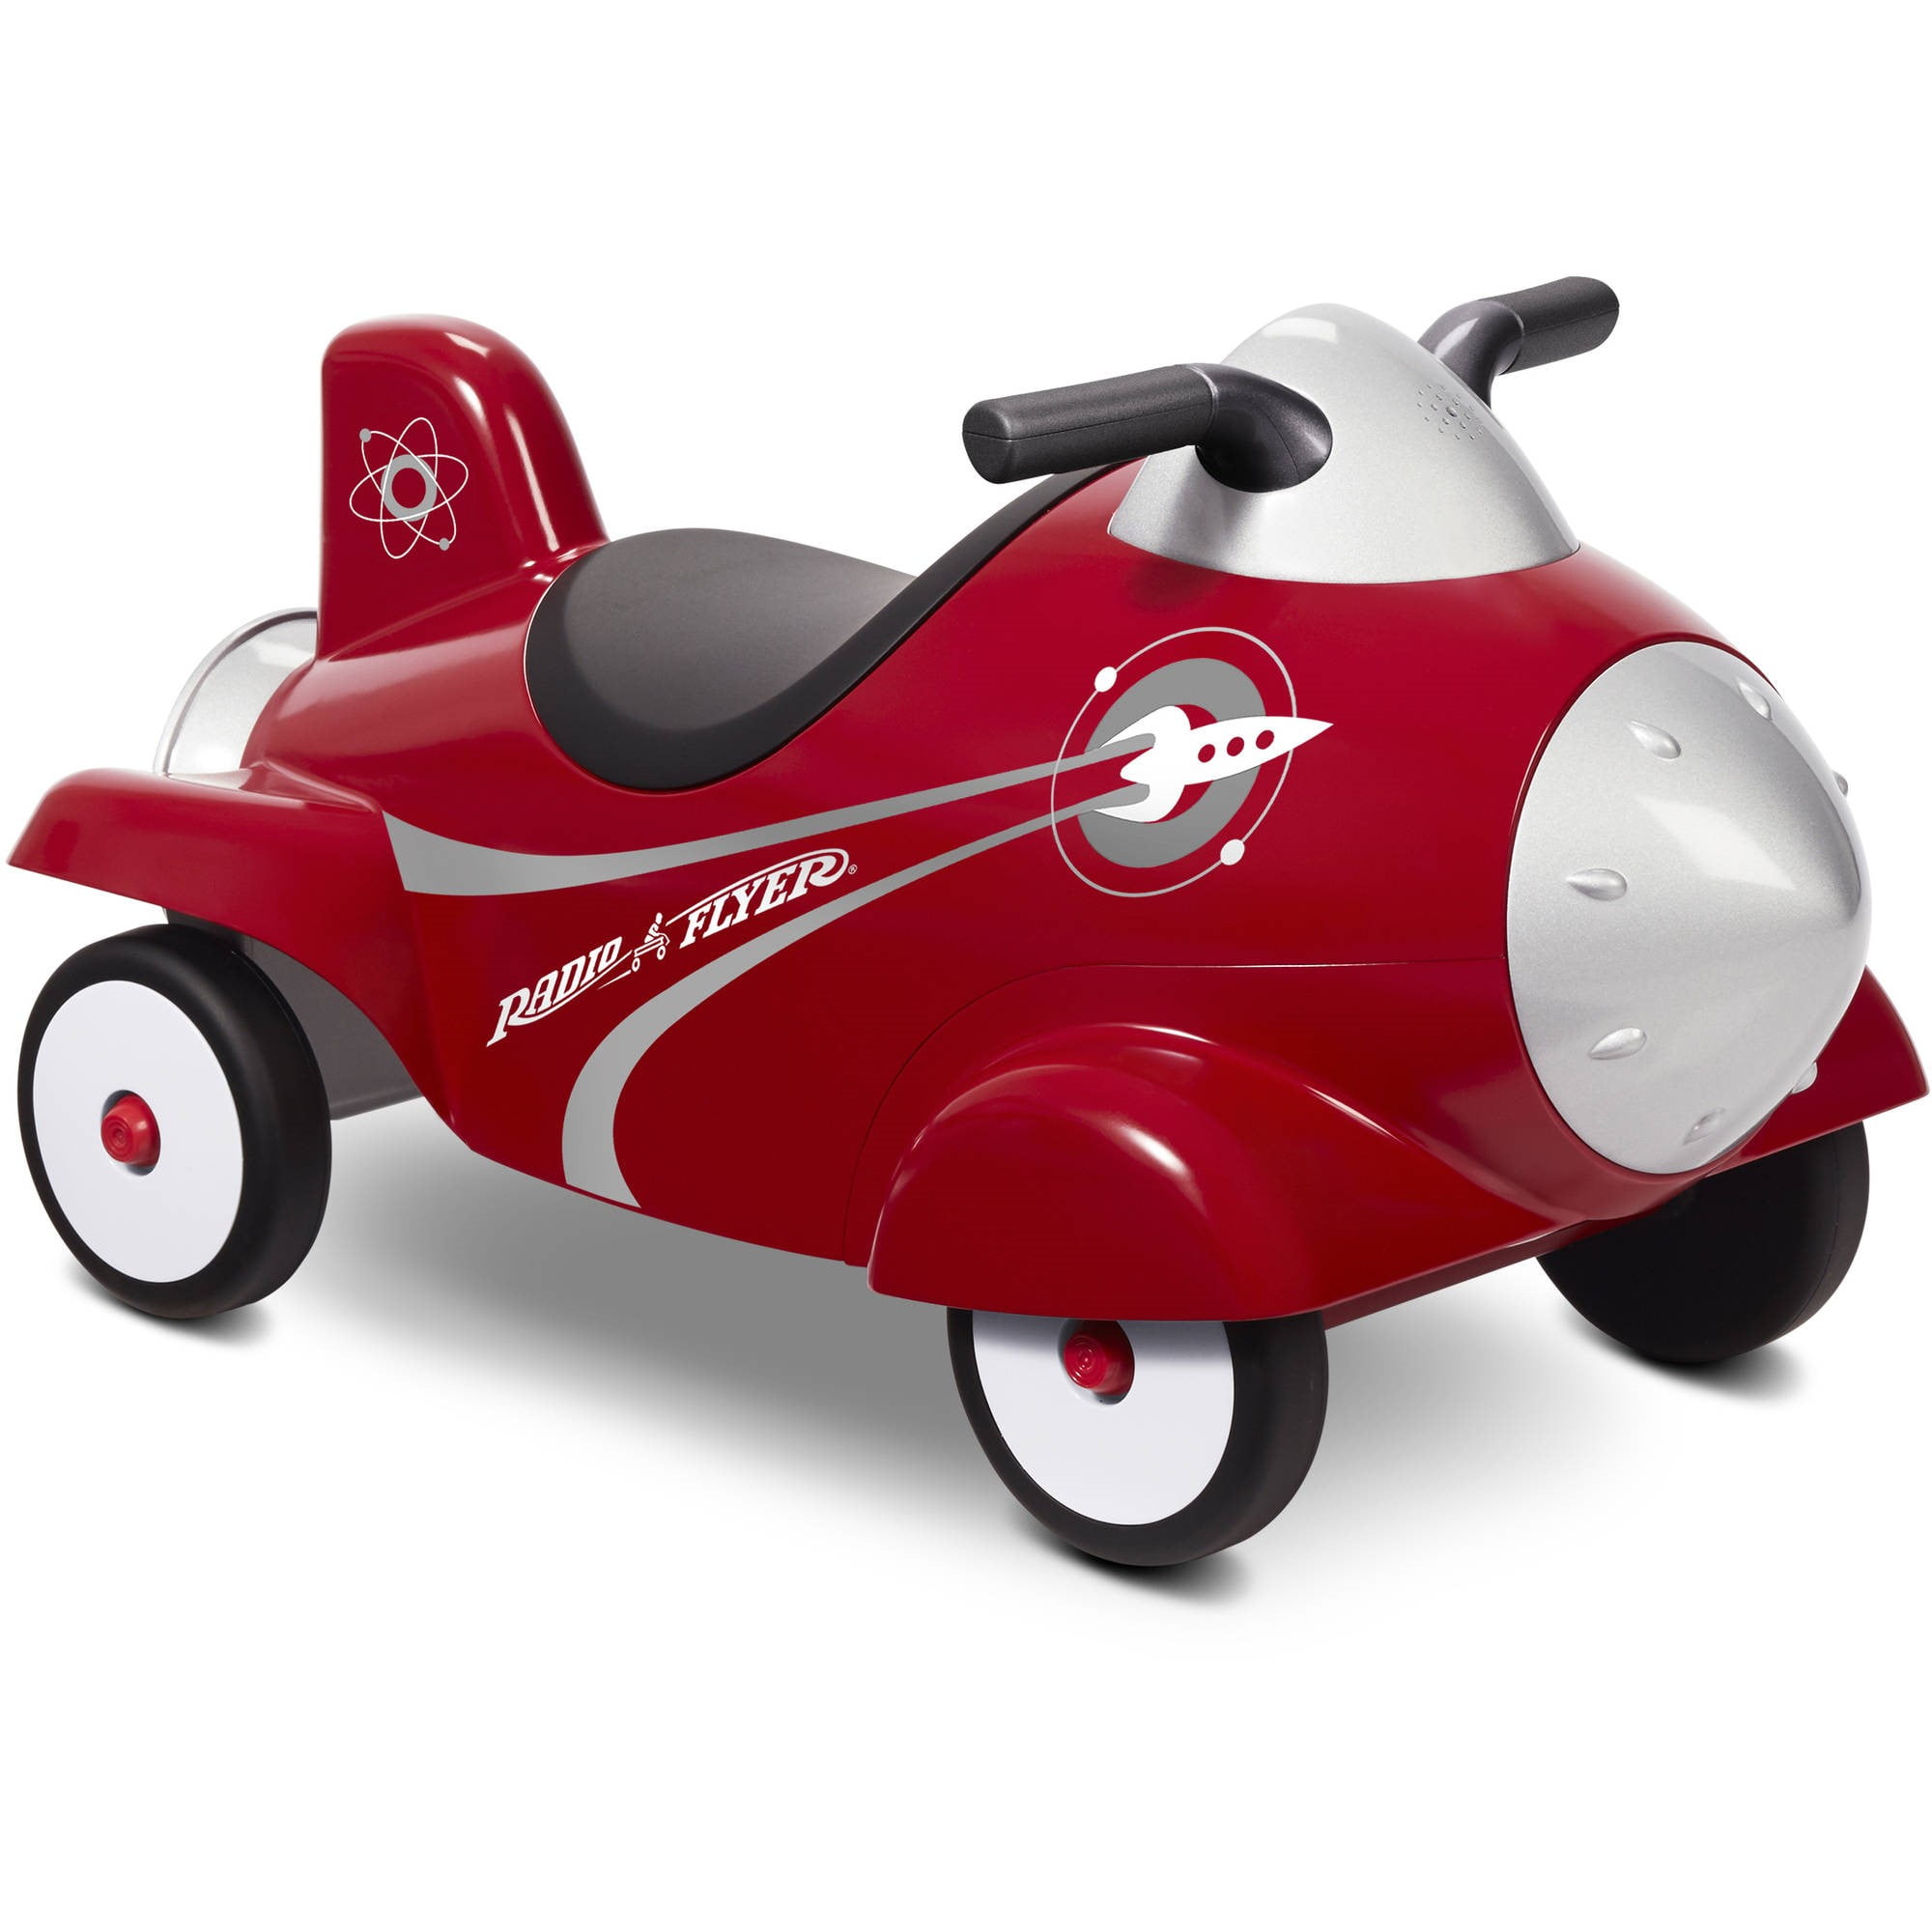 Radio Flyer Spin N Saucer Unisex Toy Red for sale online 